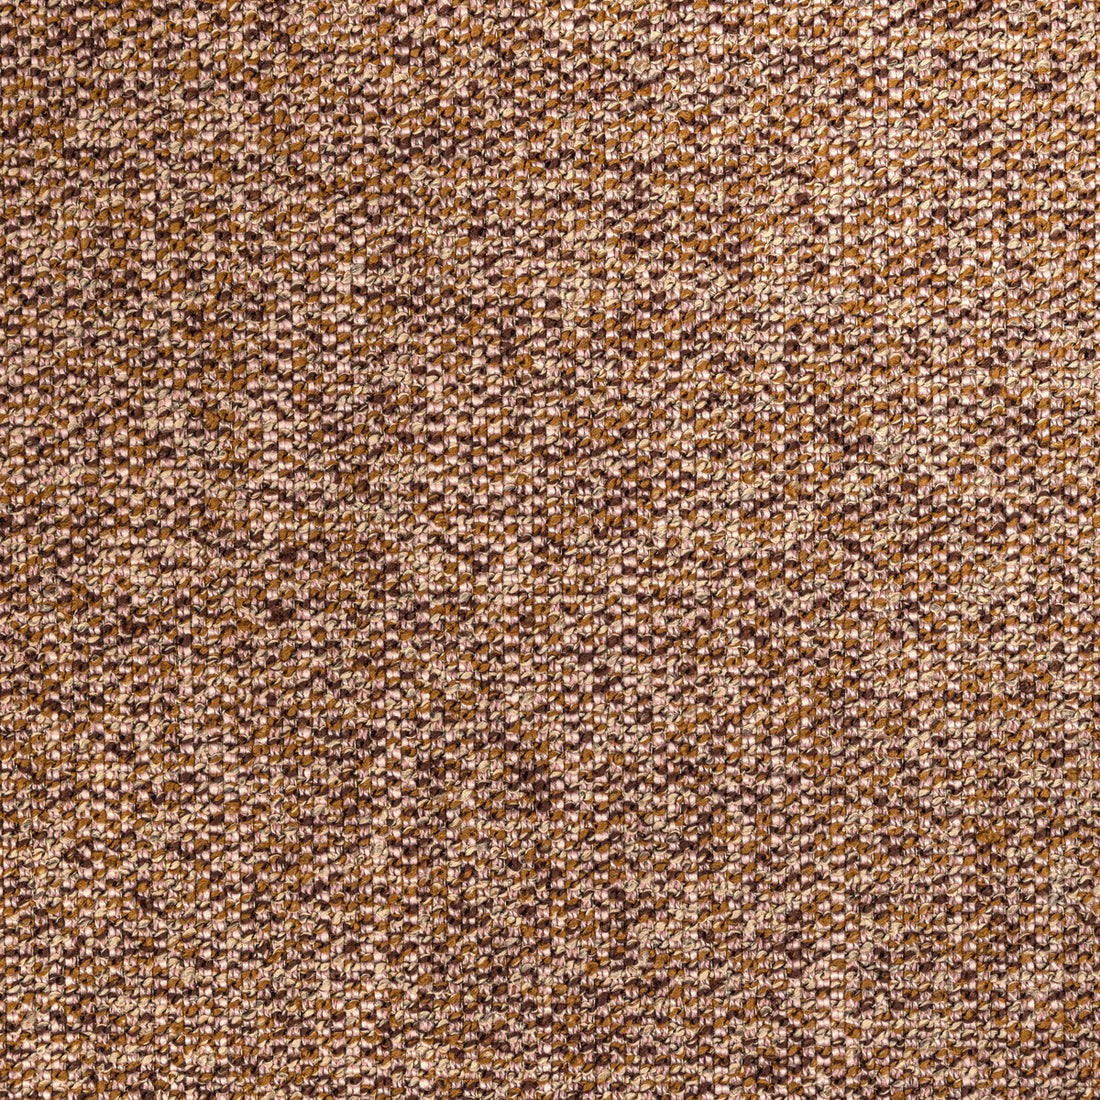 Mathis fabric in woodrose color - pattern 36699.12.0 - by Kravet Contract in the Refined Textures Performance Crypton collection